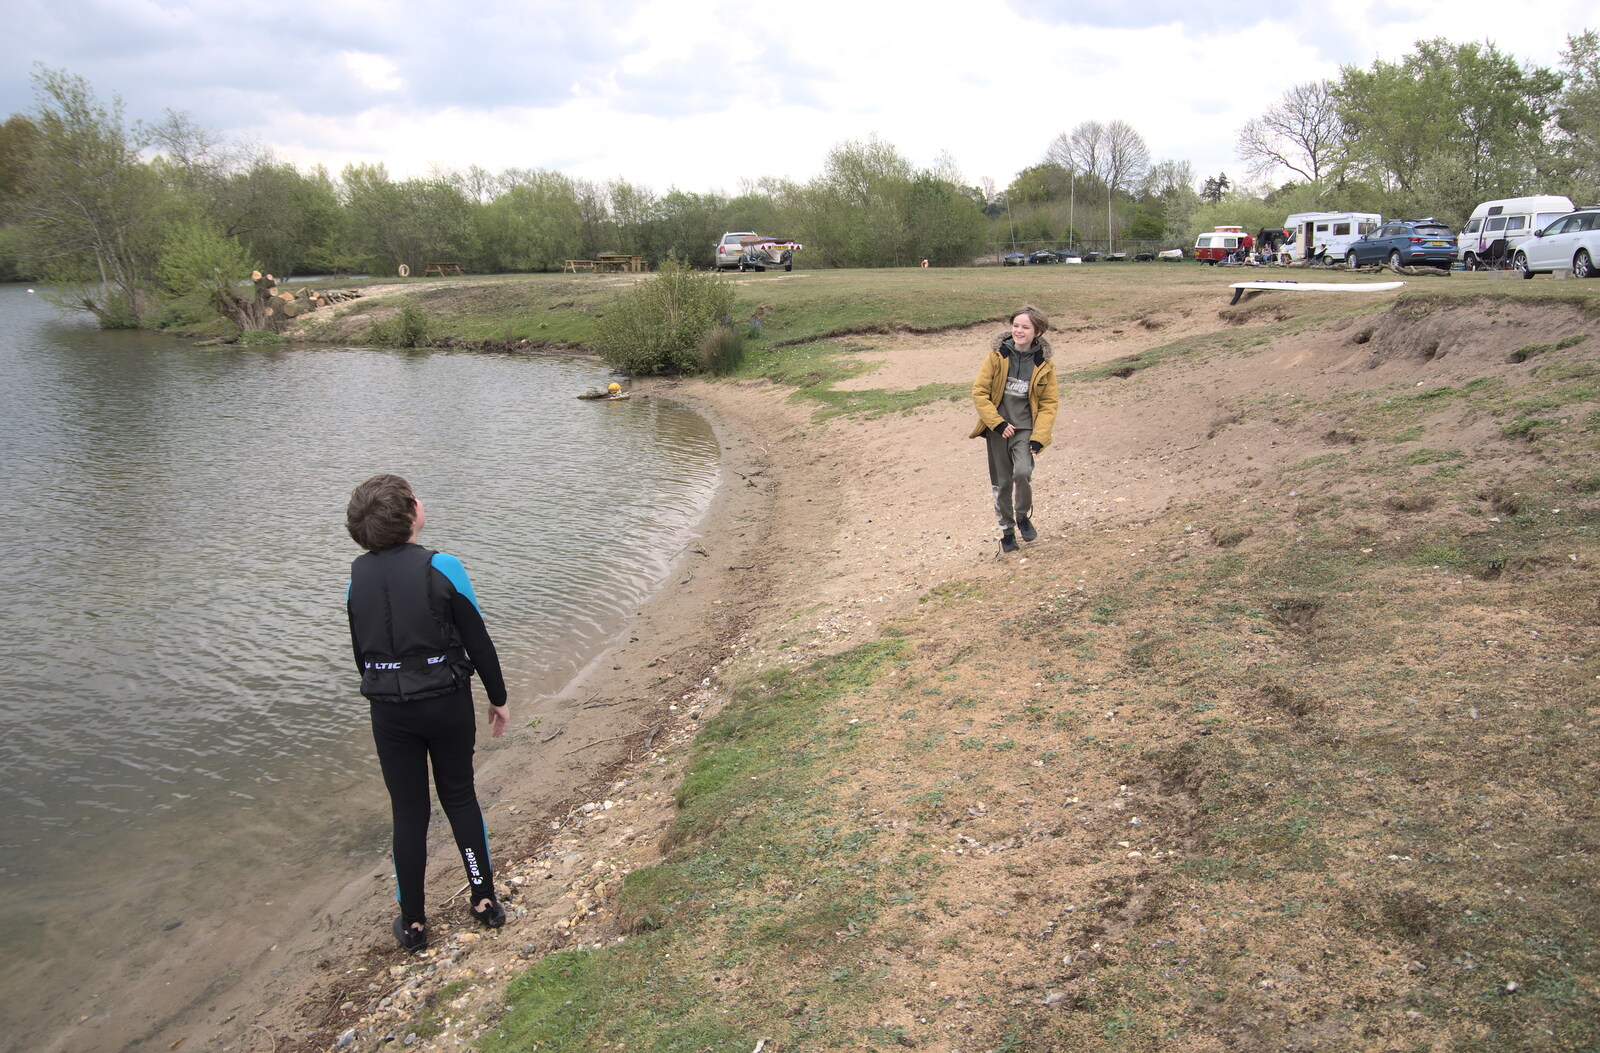 The Canoe's First Outing, Weybread Lake, Harleston - 1st May 2022: The boys on the beach